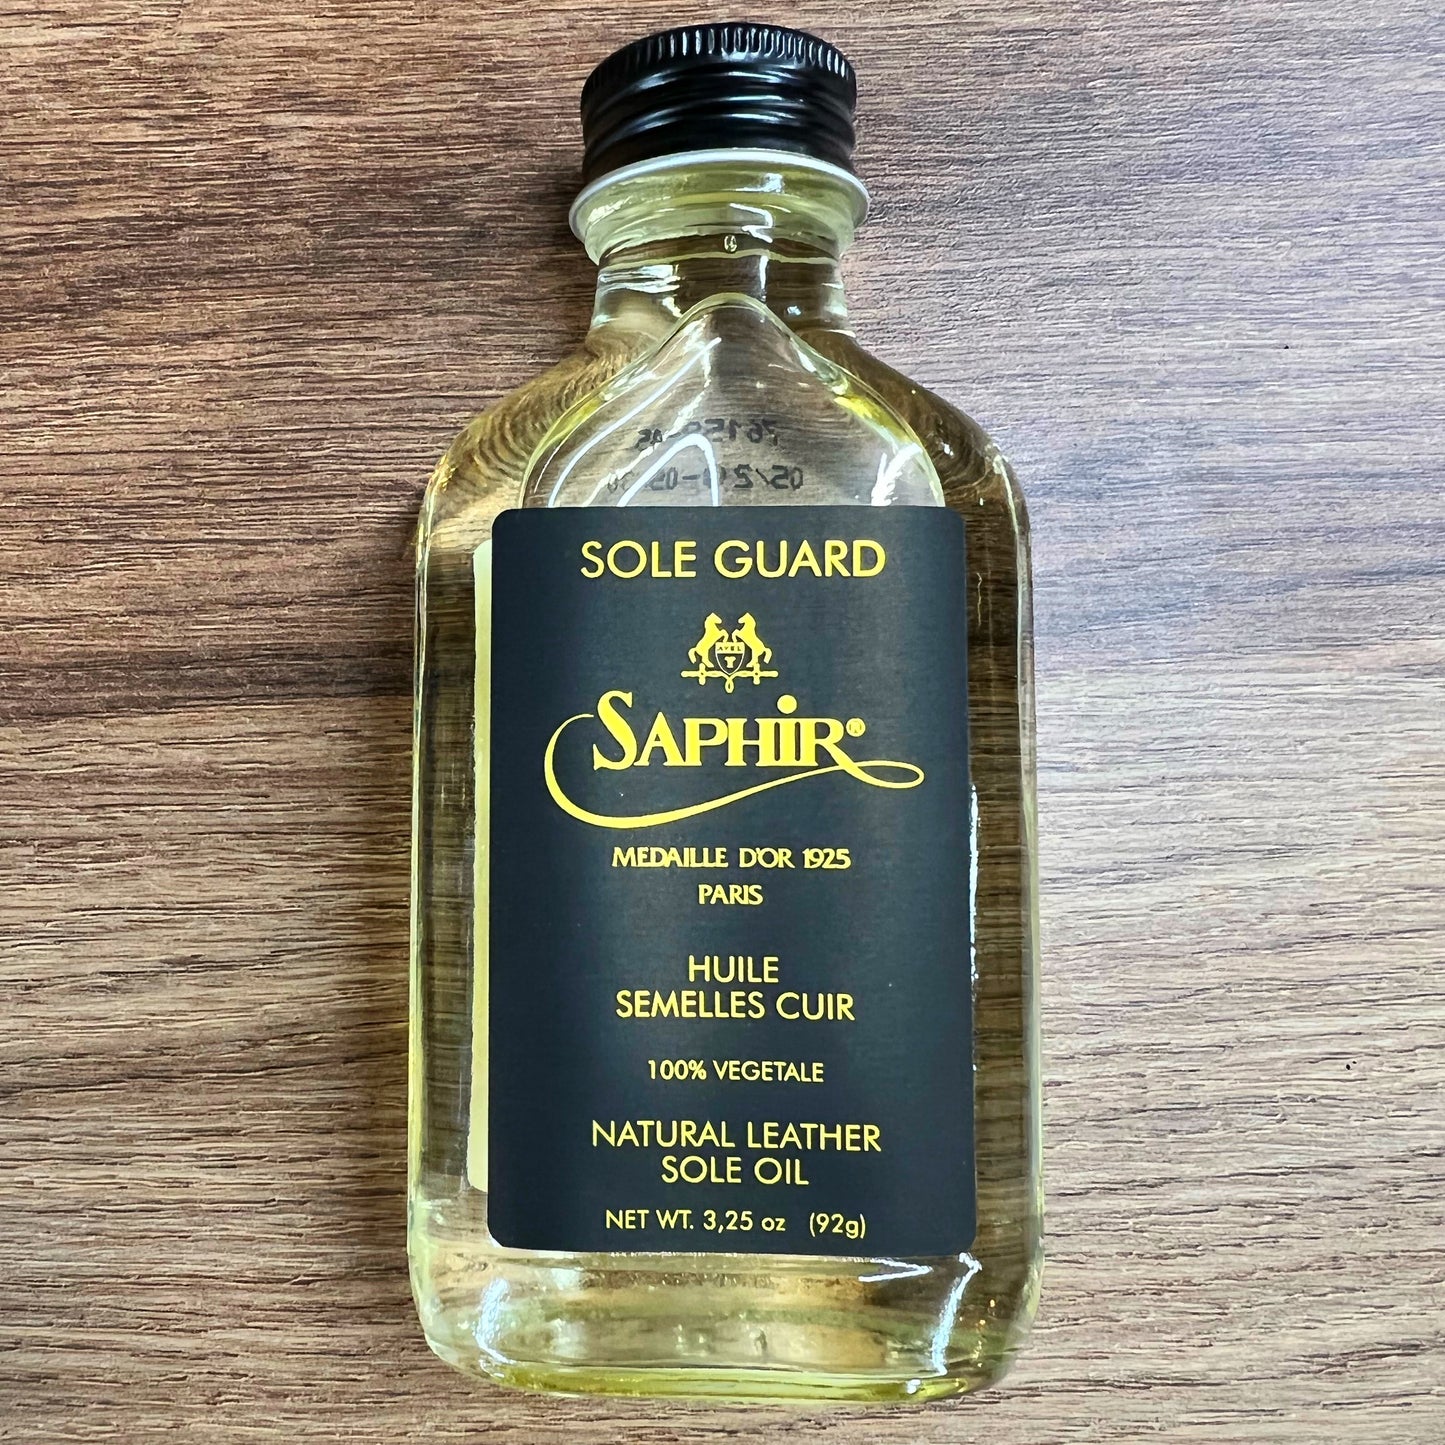 Saphir Sole Guard natural leather sole oil